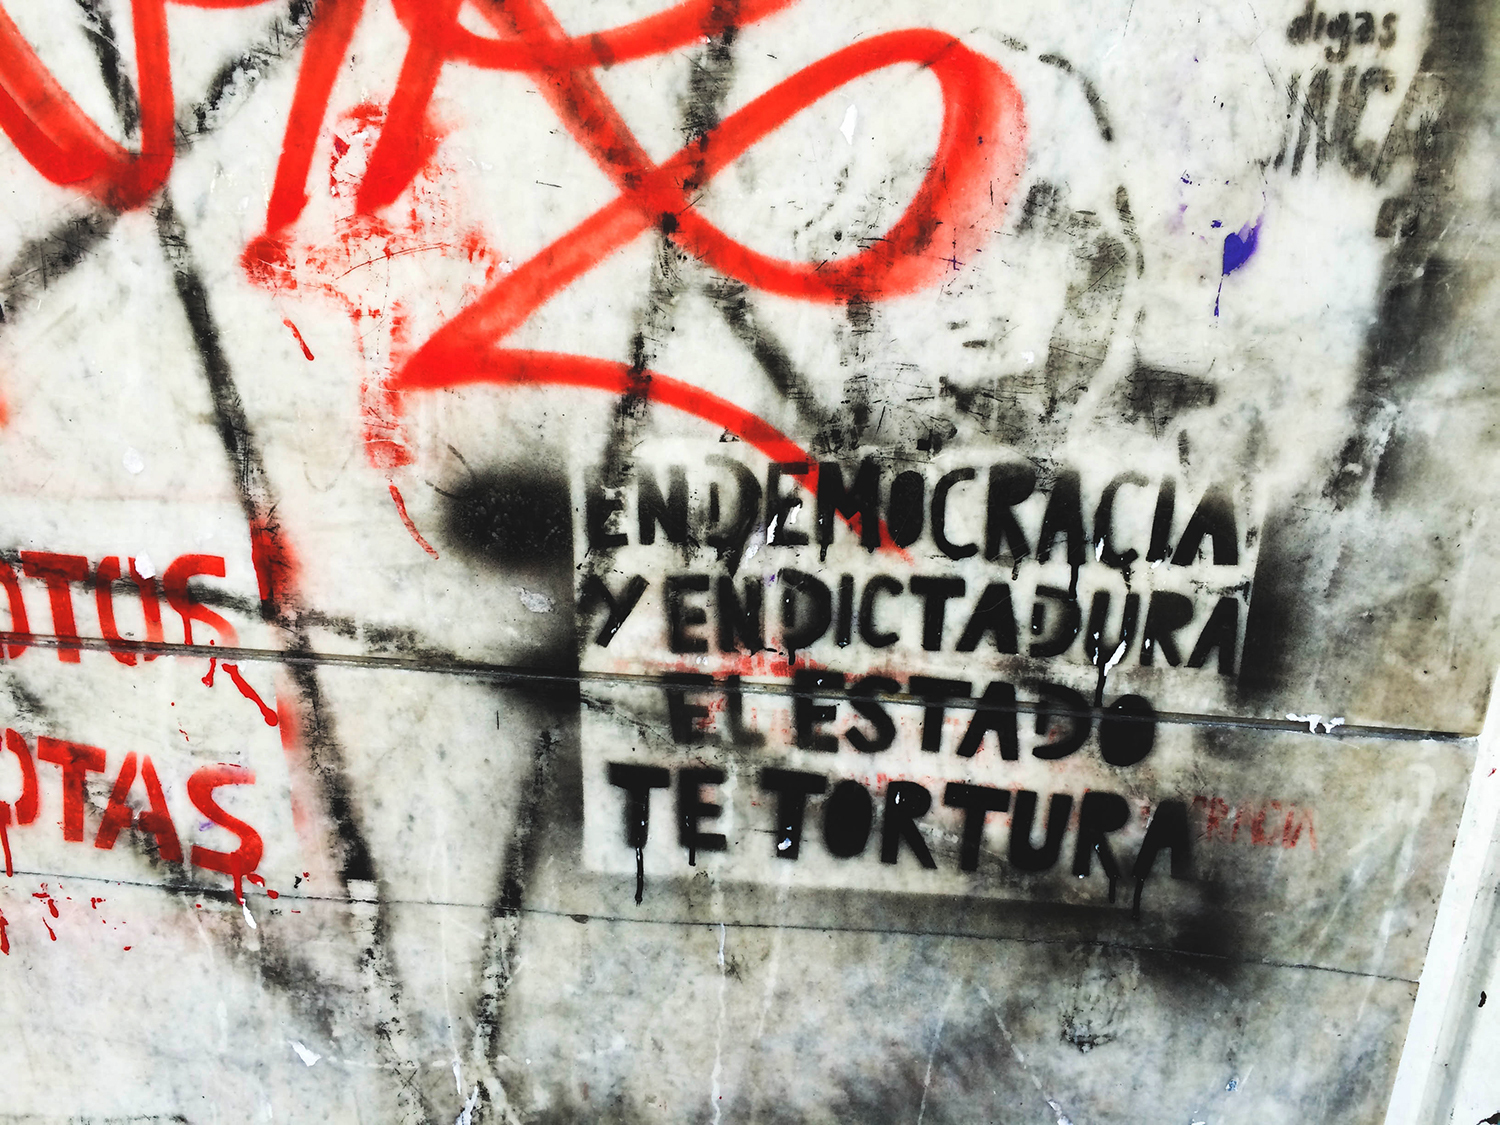 <p>'In democracy and dictatorship, the state tortures you.' A tag capturing a certain Argentine nihilism.</p>